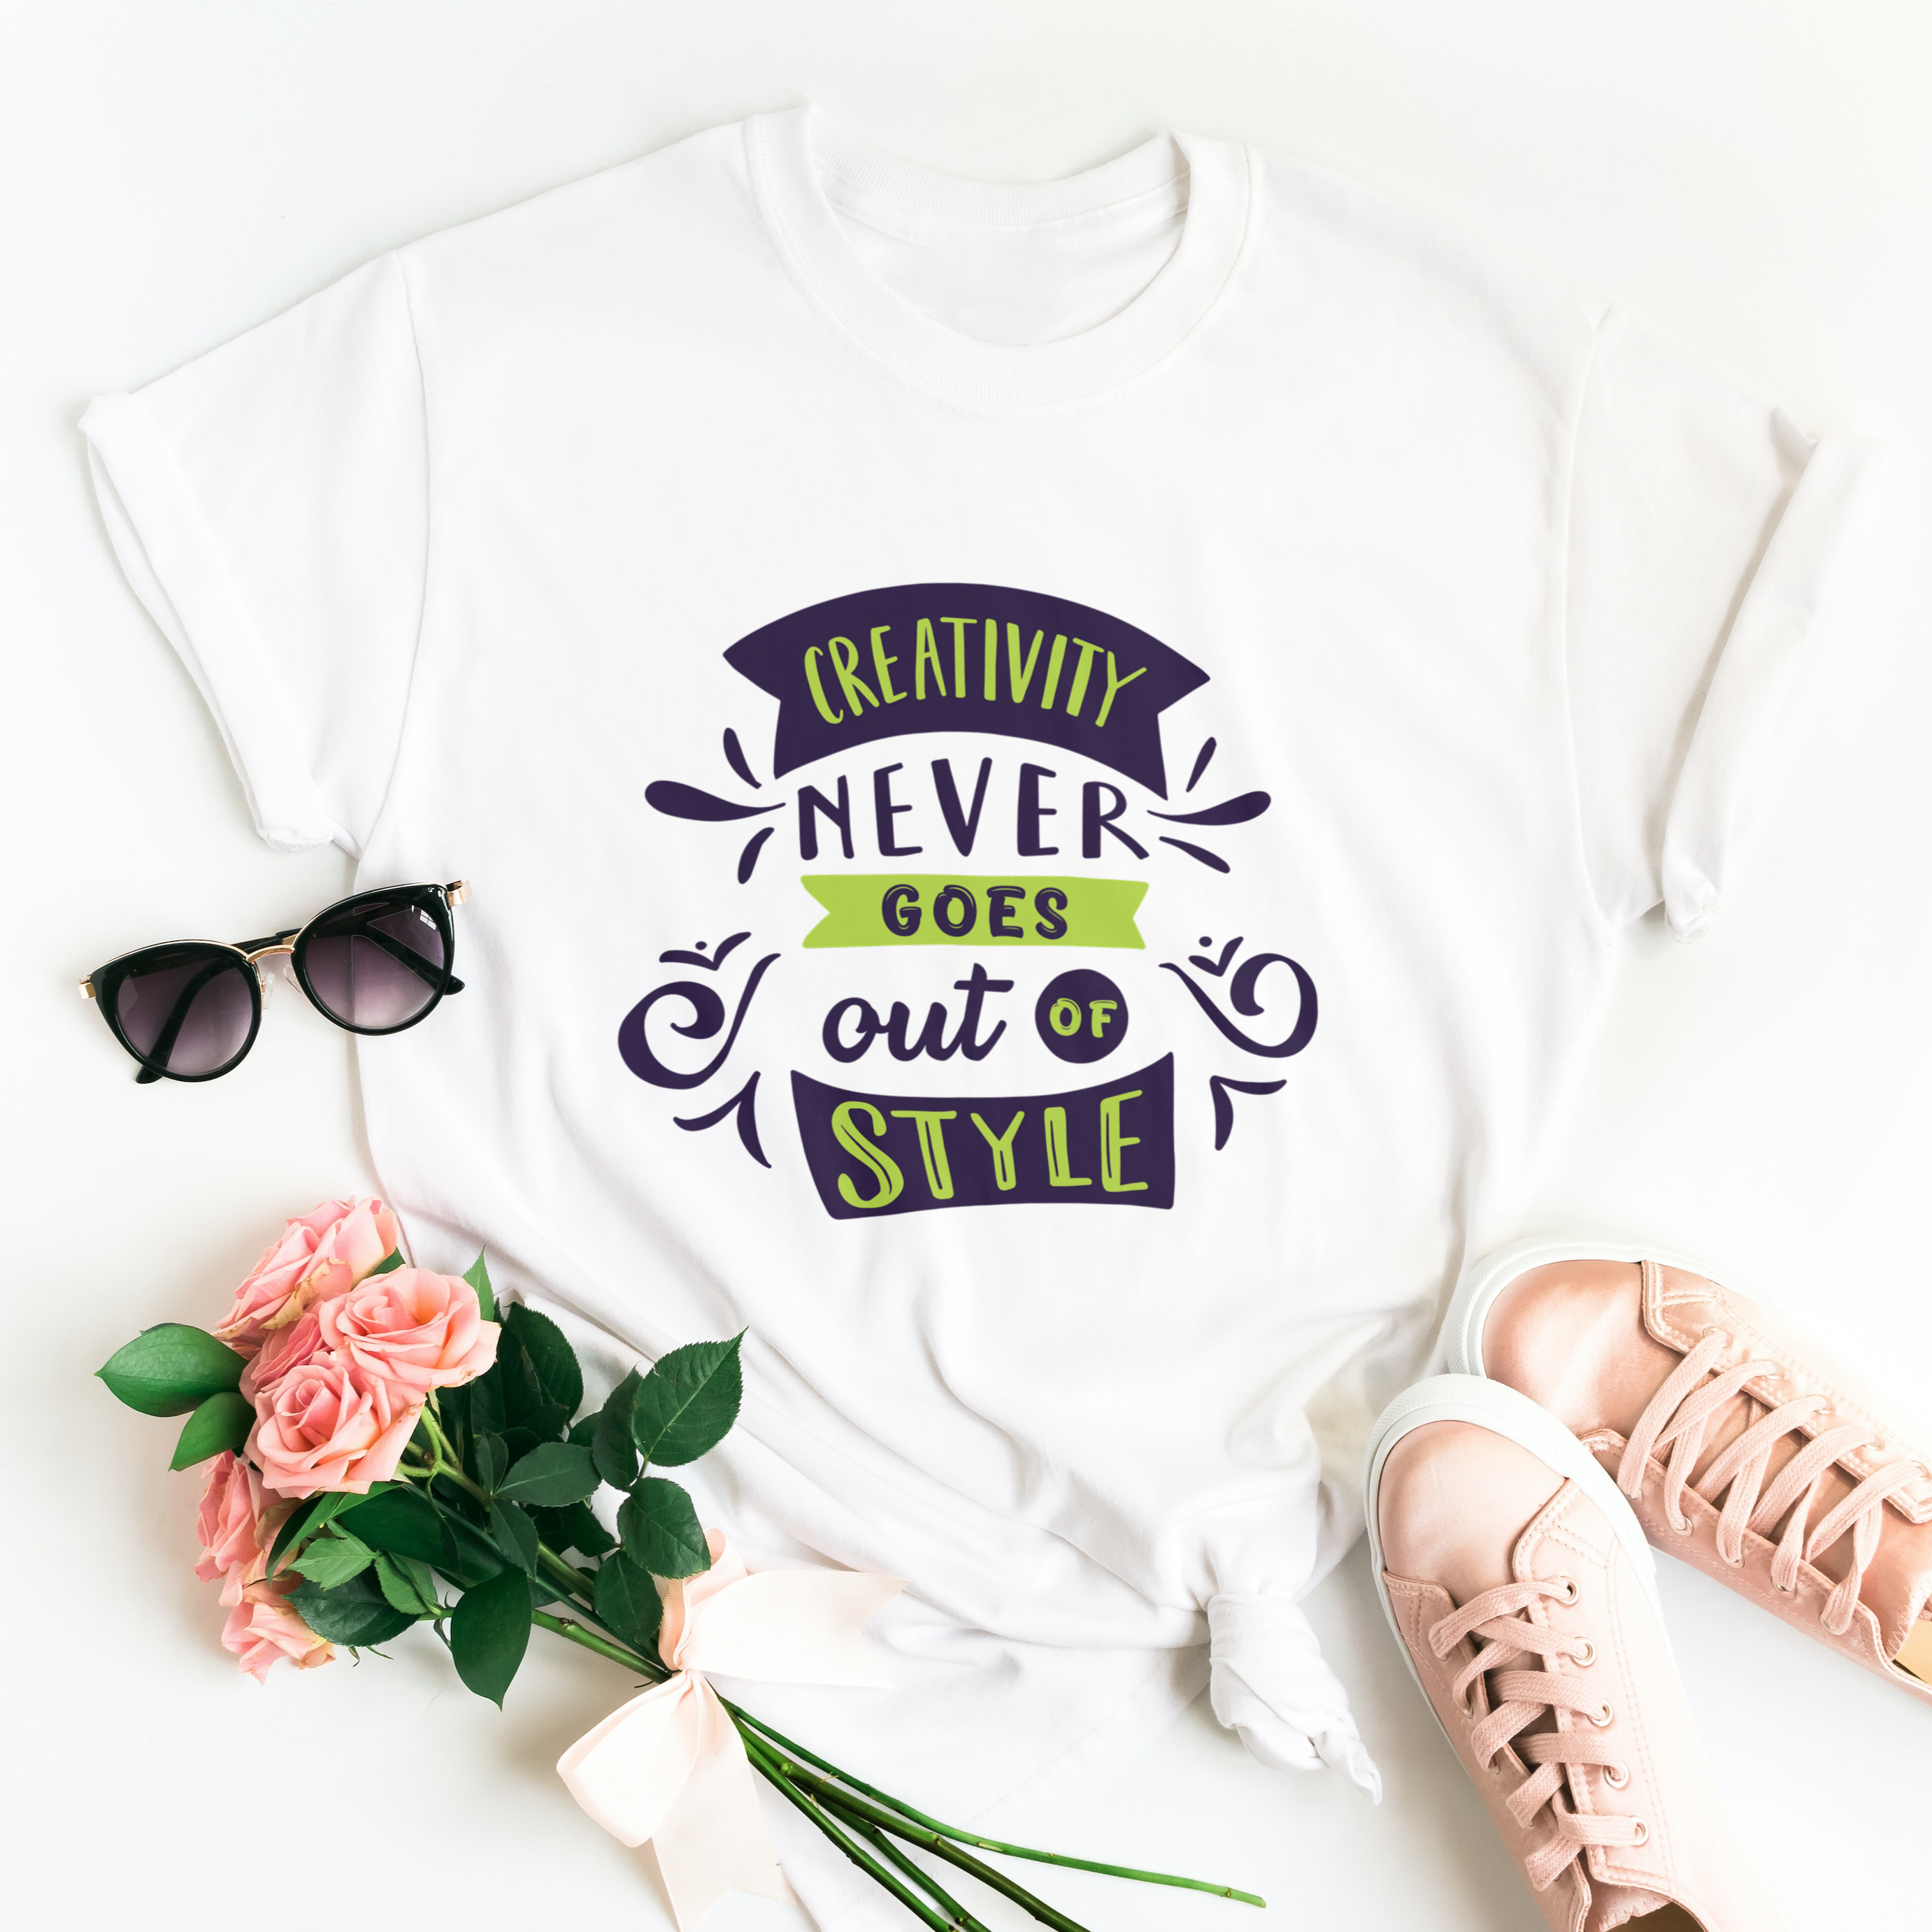 Story of Awakening Lifestyle Community Spirituality Relationships Love Light Meditation Oneness Earth Balance Healing Shop Store Charity Tree Nature Read Write T shirt Tops Tees Clothing Women Horoscope Creativity Never Goes Out Of Style Quote